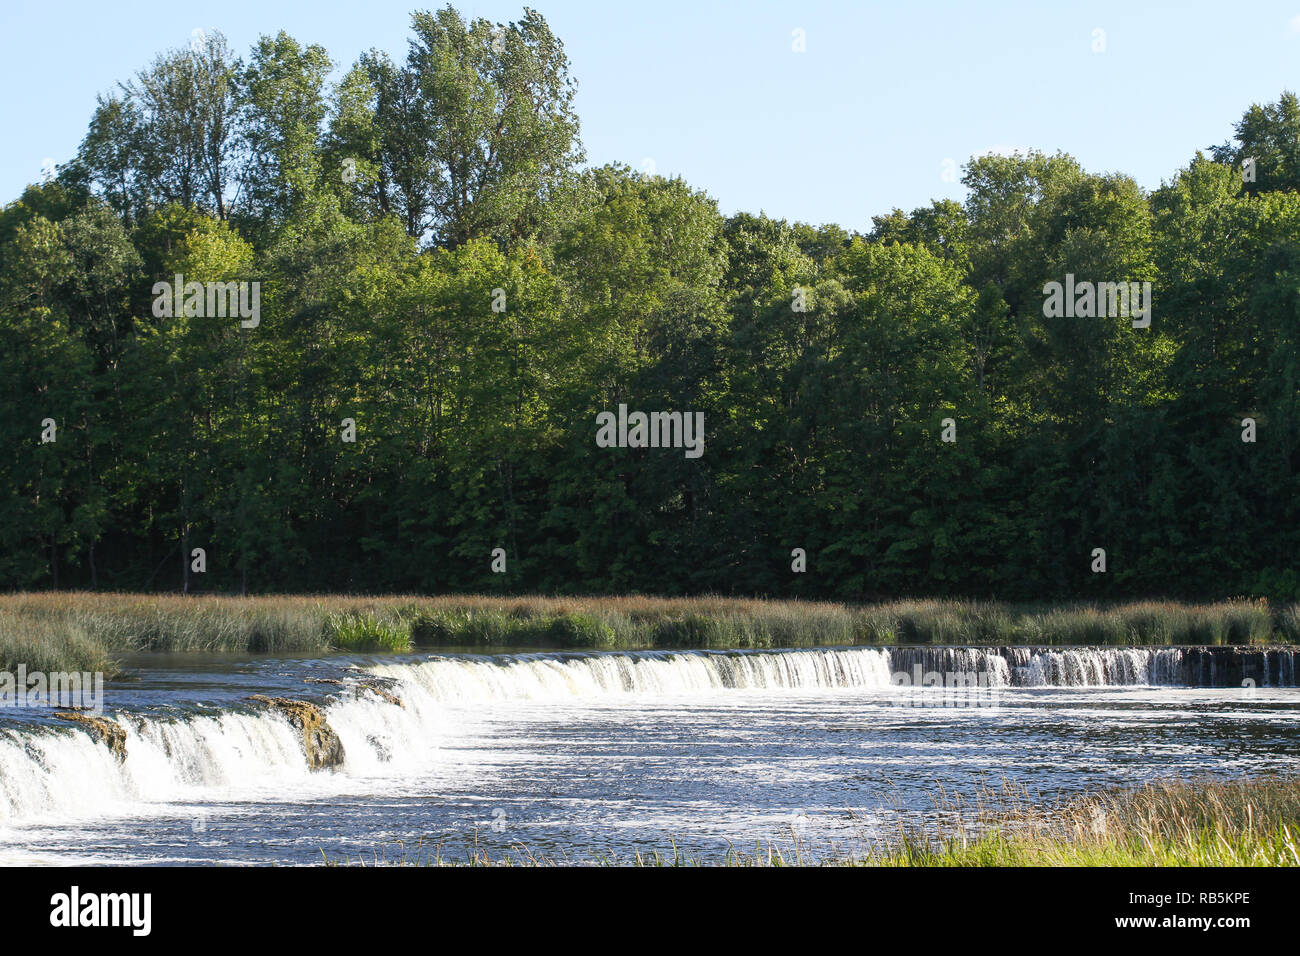 Beautifuyl countryside view of wides waterfall in whole Europe, the Ventas rumba. Stock Photo